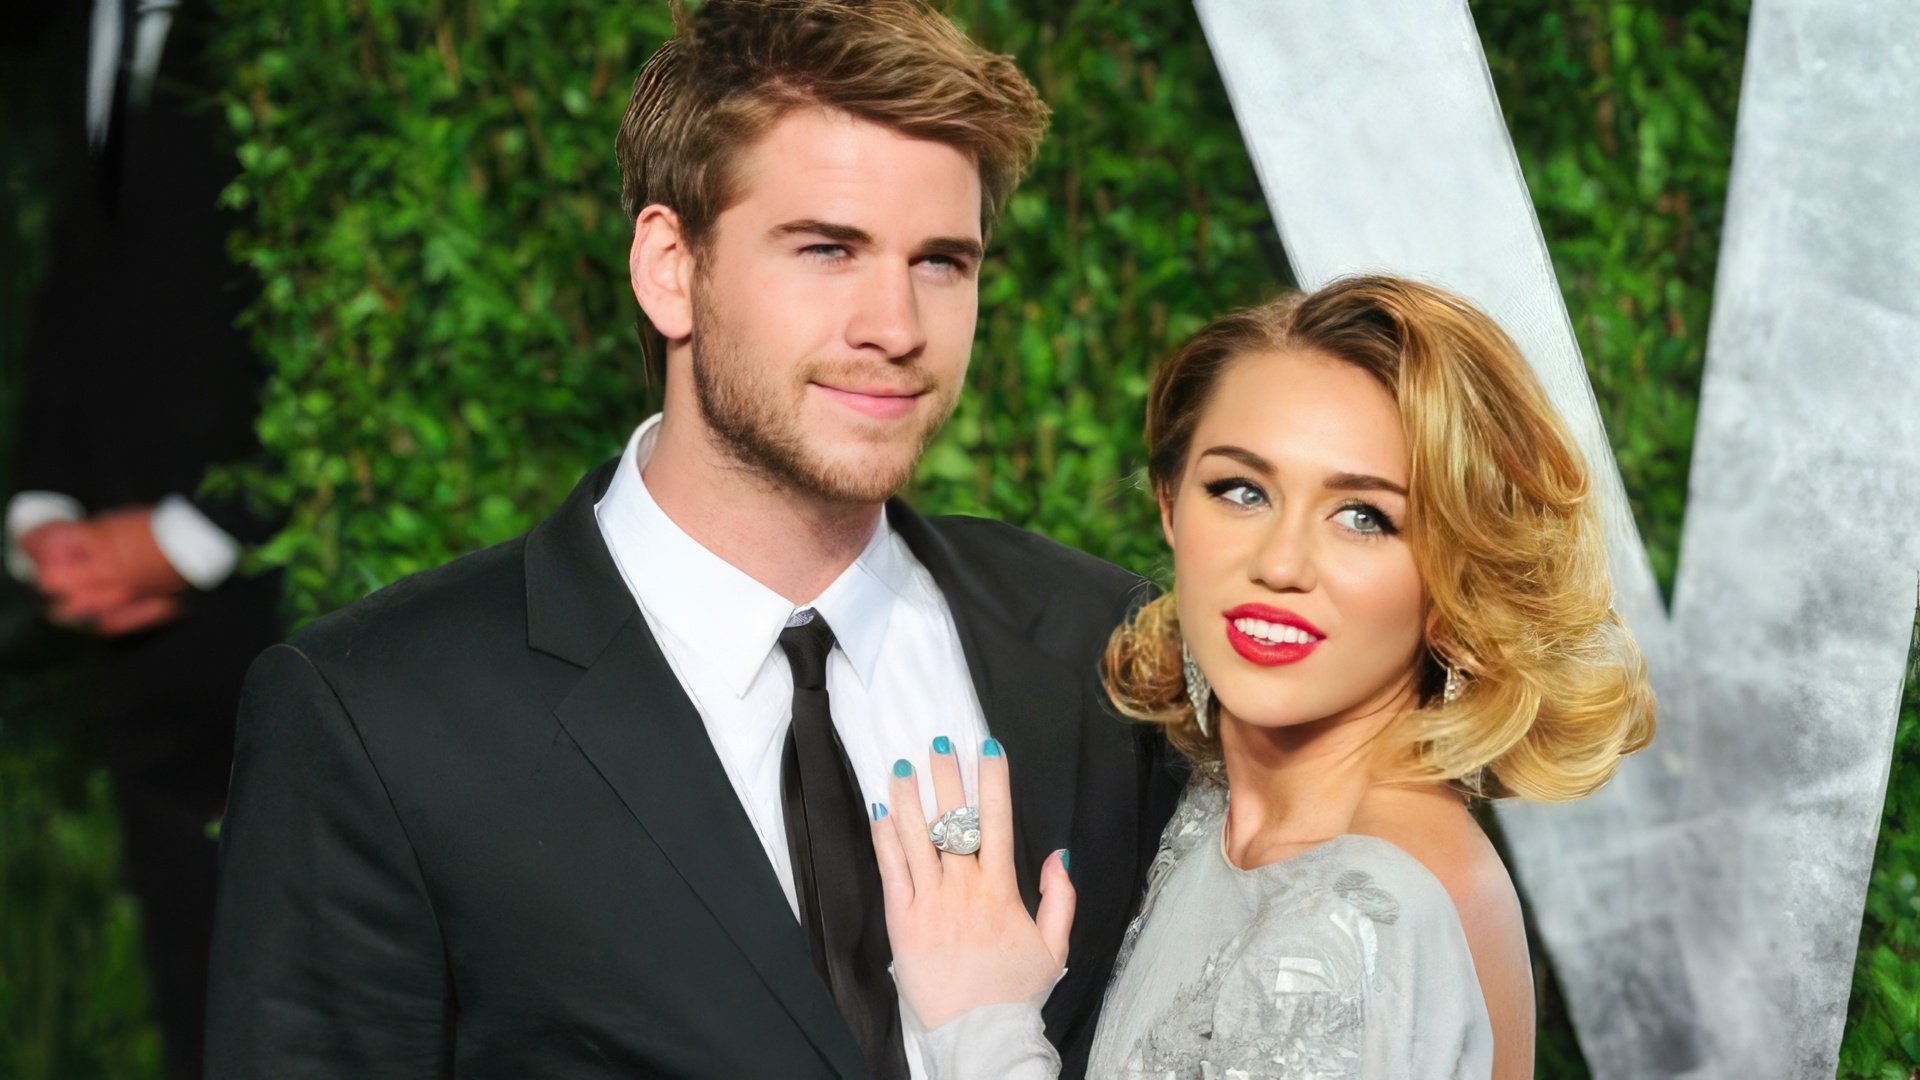 Miley Cyrus and Liam Hemsworth wanted to get married in the summer of 2016